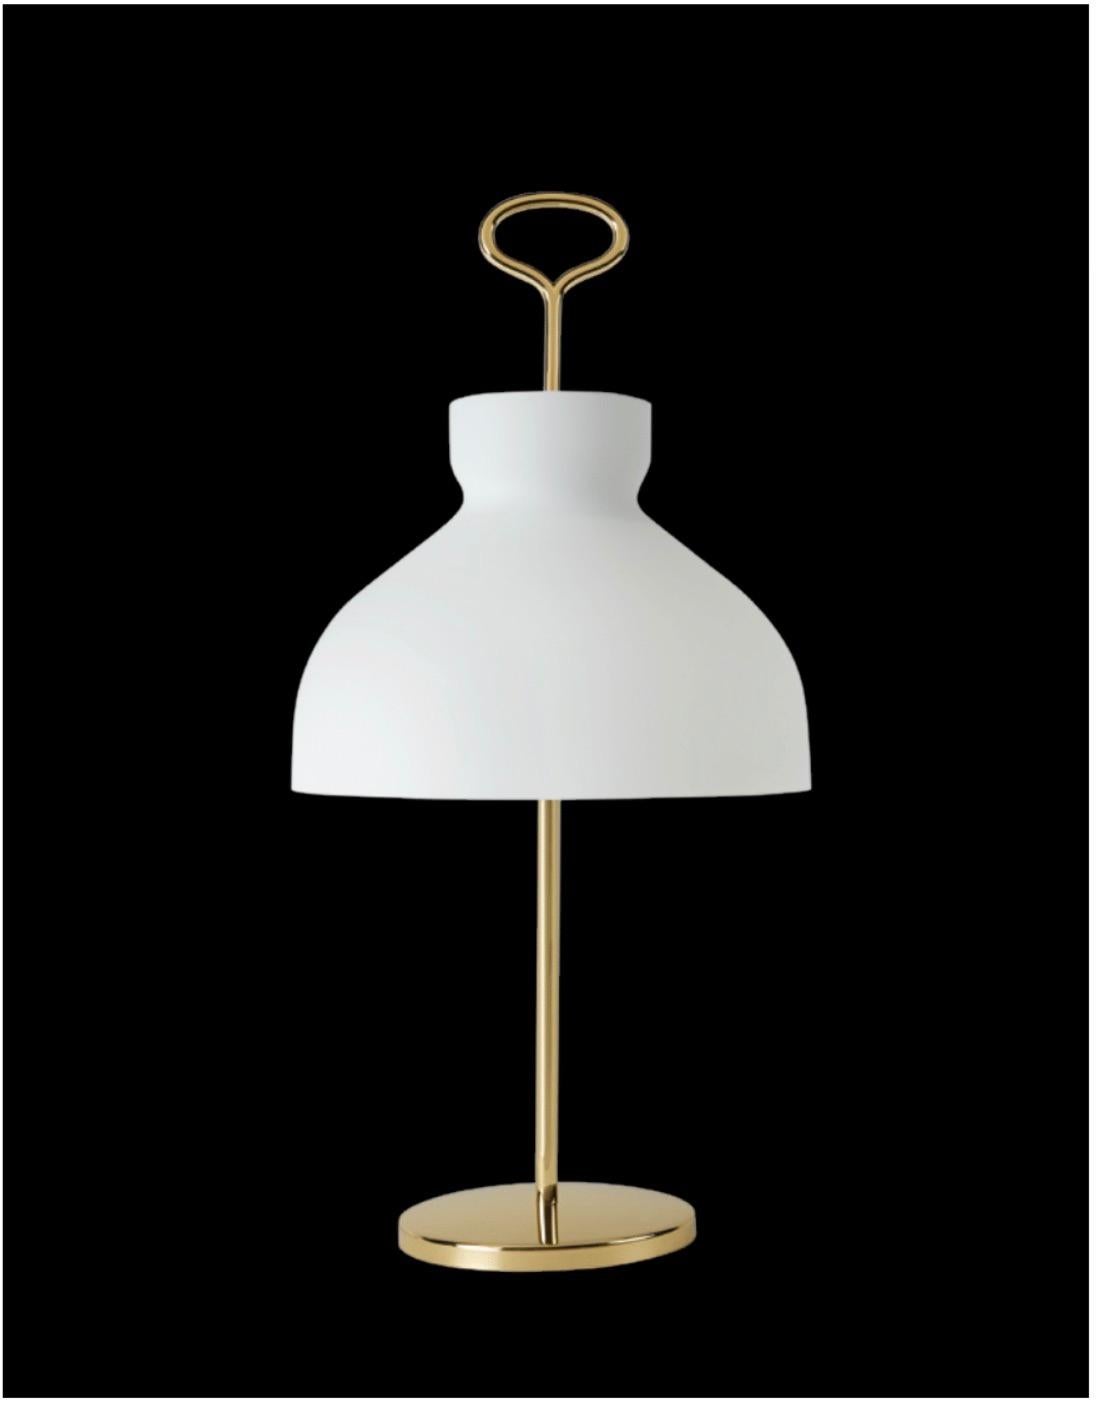 Satin glass shade with a brass stem and handle. Current production by Tato. Designed and manufactured in Italy. Takes 3X LED MAX 5W E14/E12 bulb. Bulbs not provided.